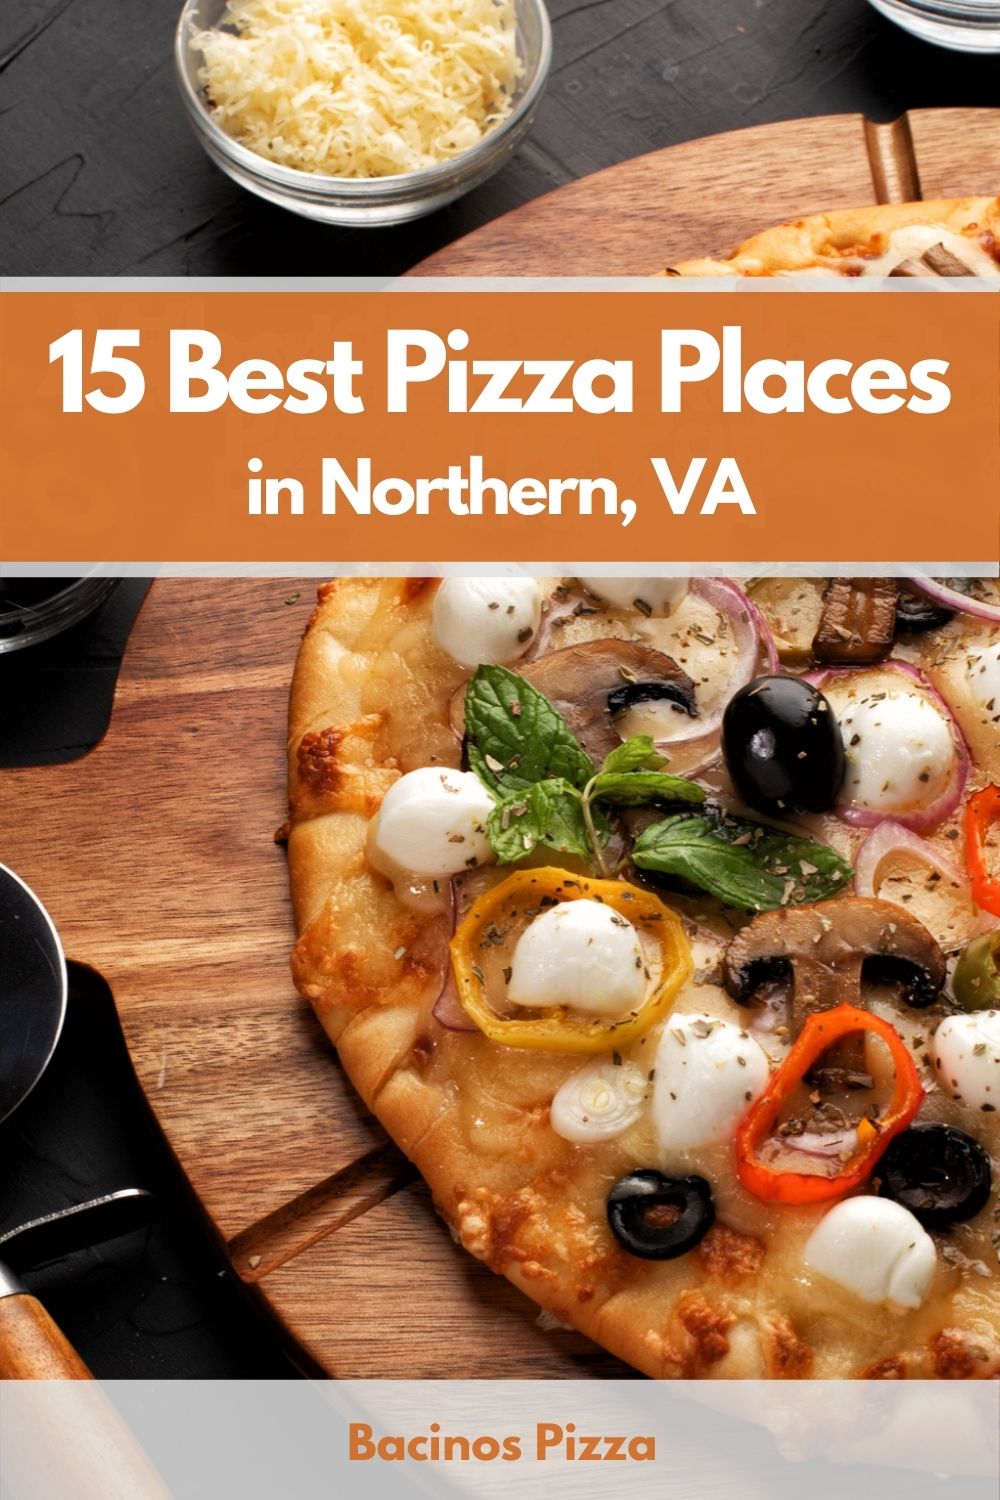 15 Best Pizza Places in Northern, VA pin